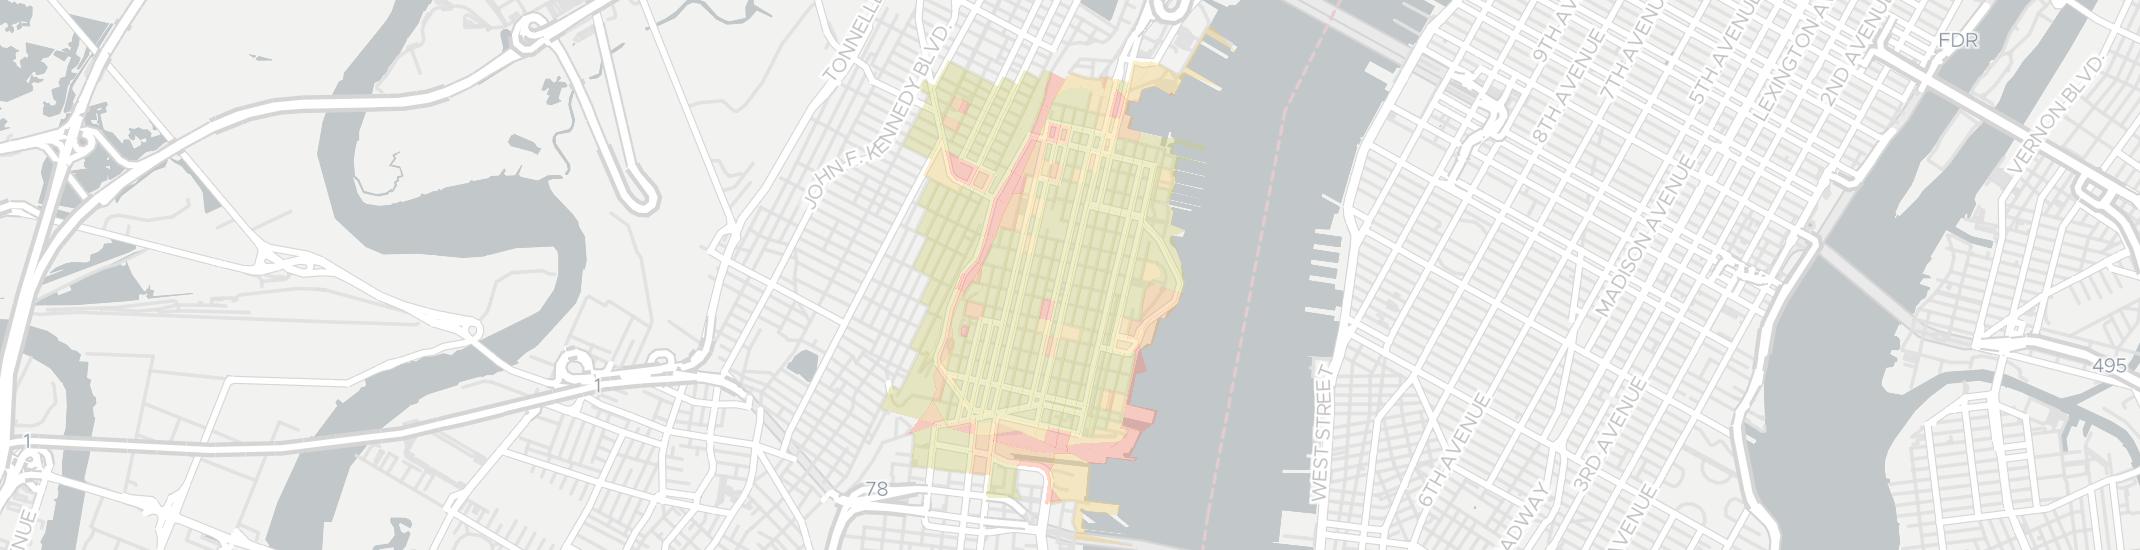 Hoboken Internet Competition Map. Click for interactive map